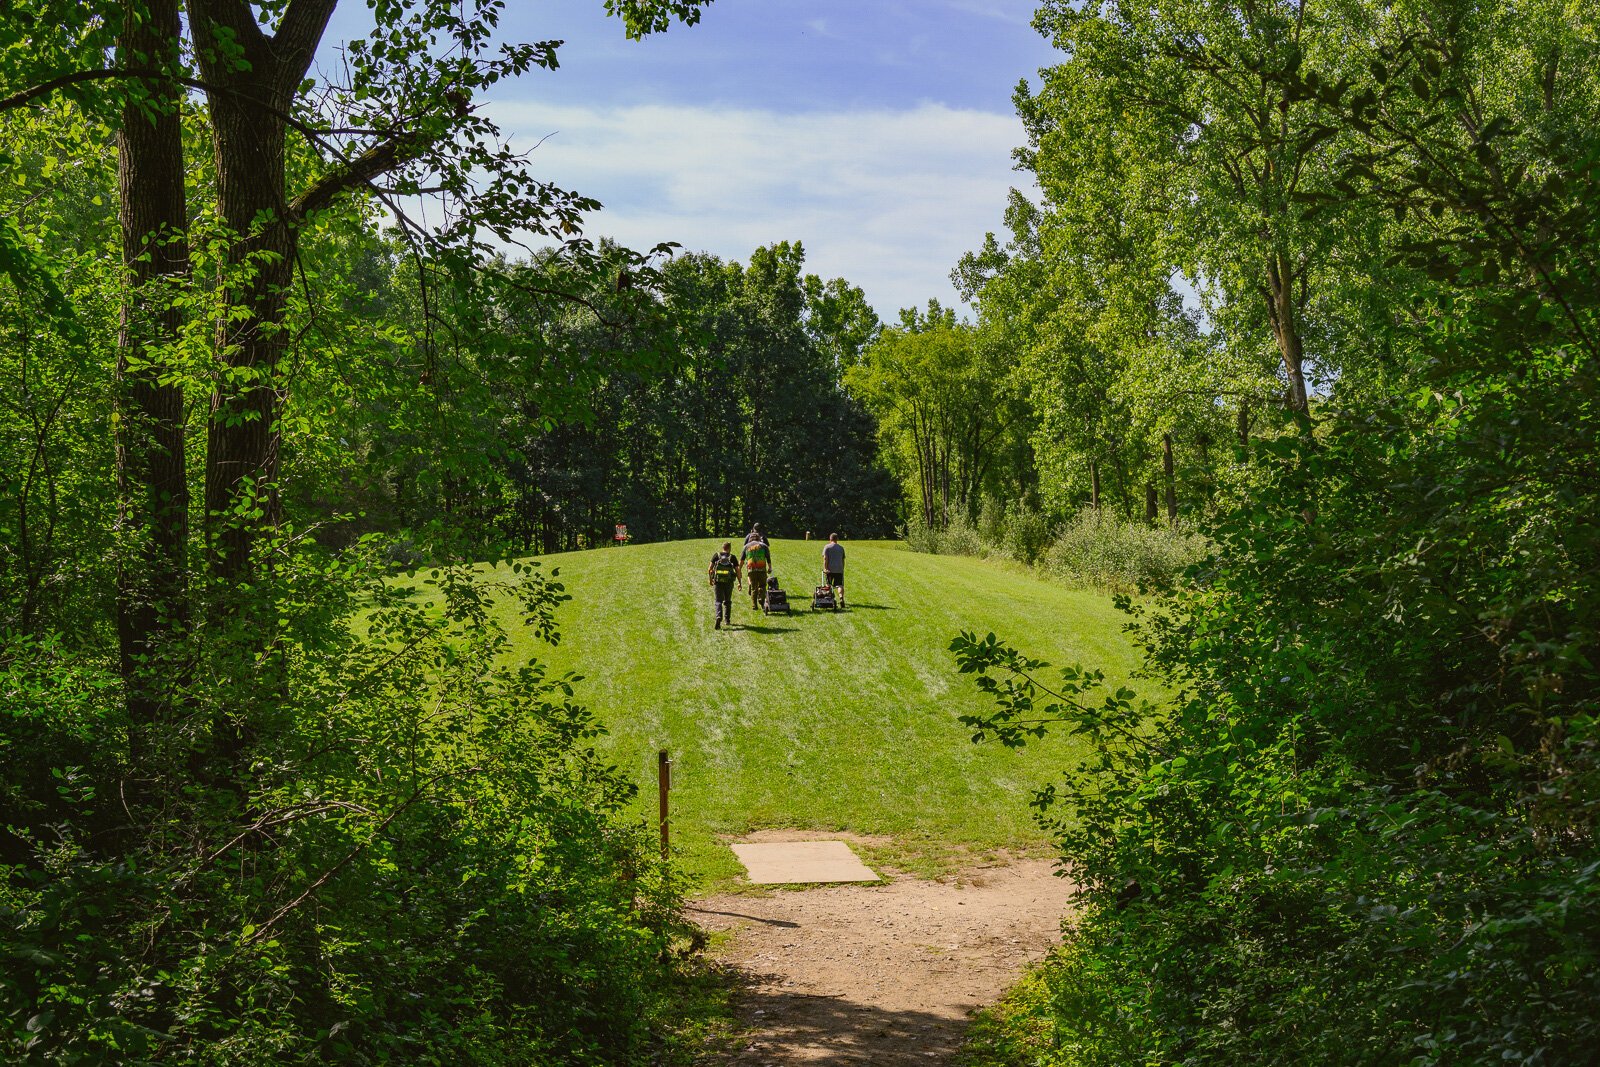 The Red Hawk Disc Golf Course at Independence Lake County Park.